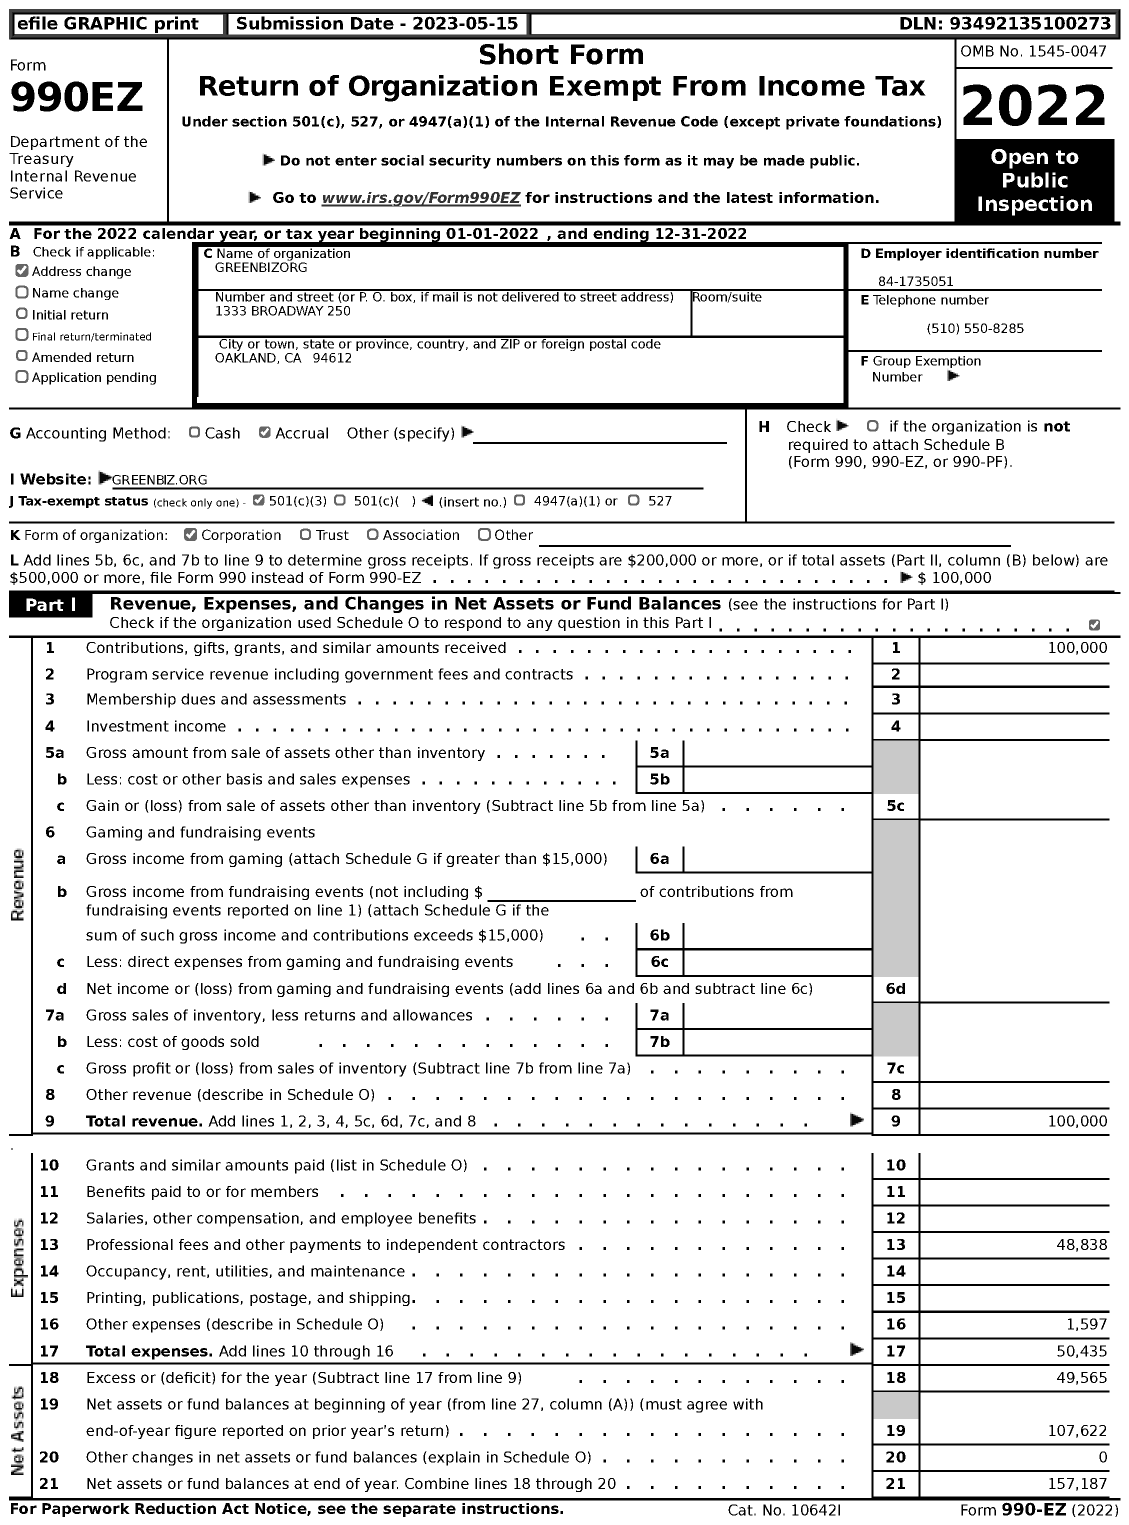 Image of first page of 2022 Form 990EZ for Greenbizorg